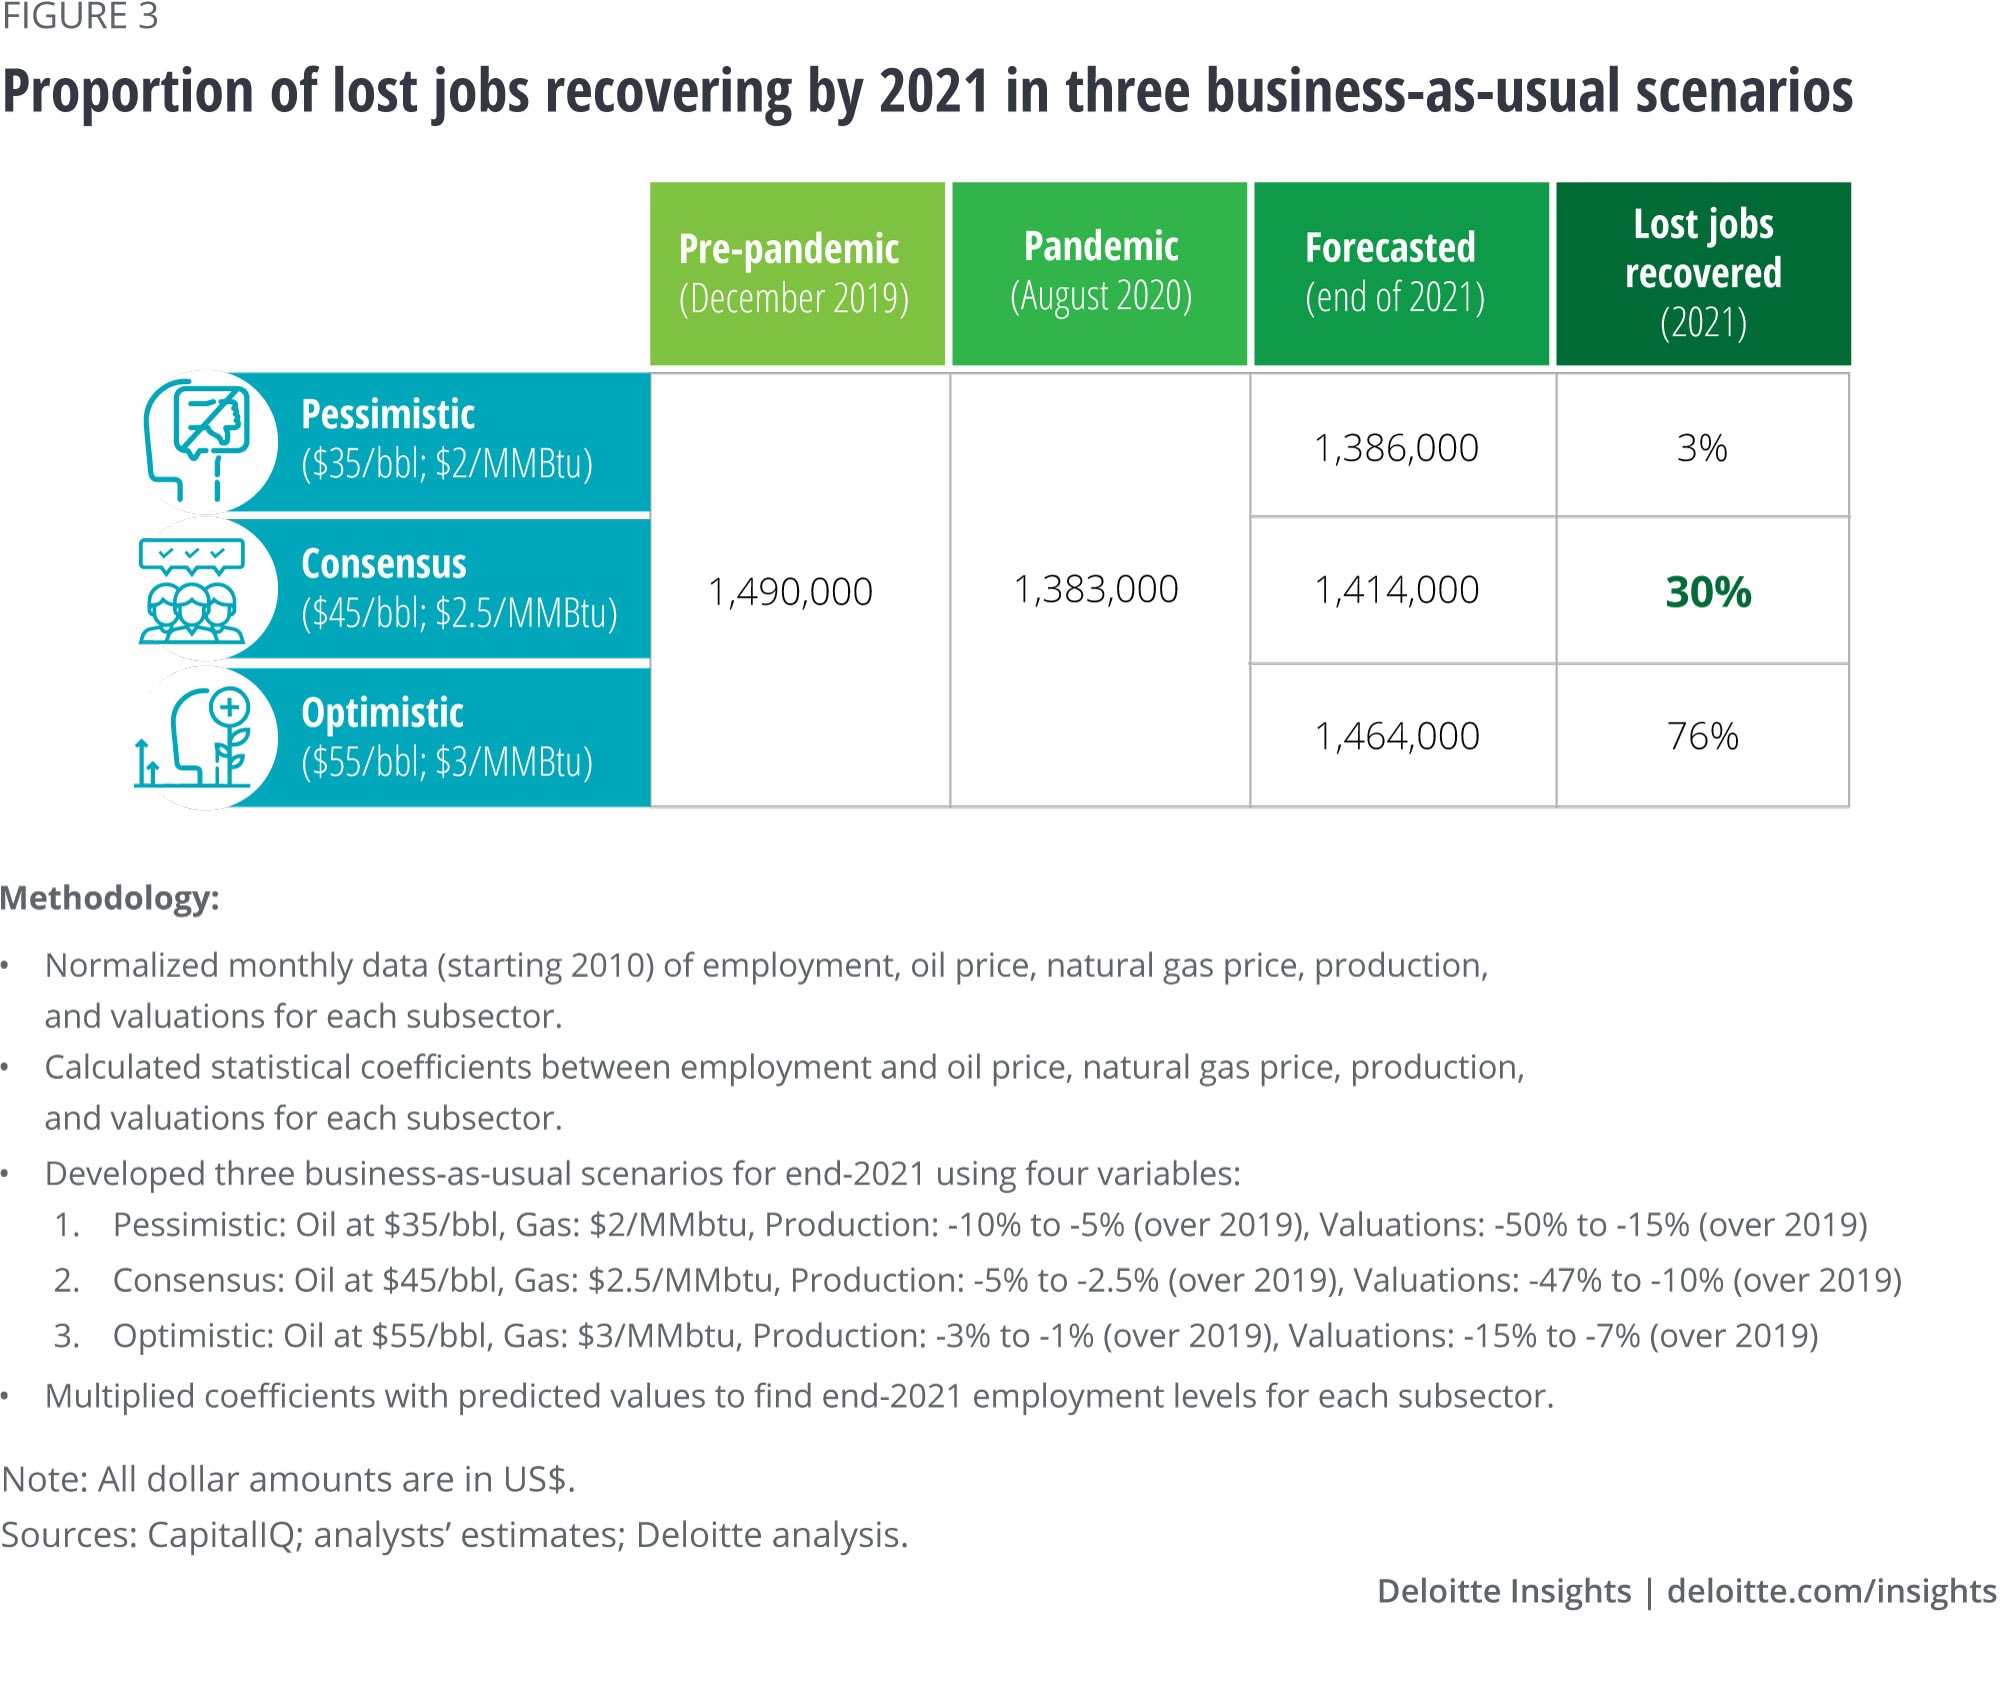 Proportion of lost jobs recovering by 2021 in three business-as-usual scenarios